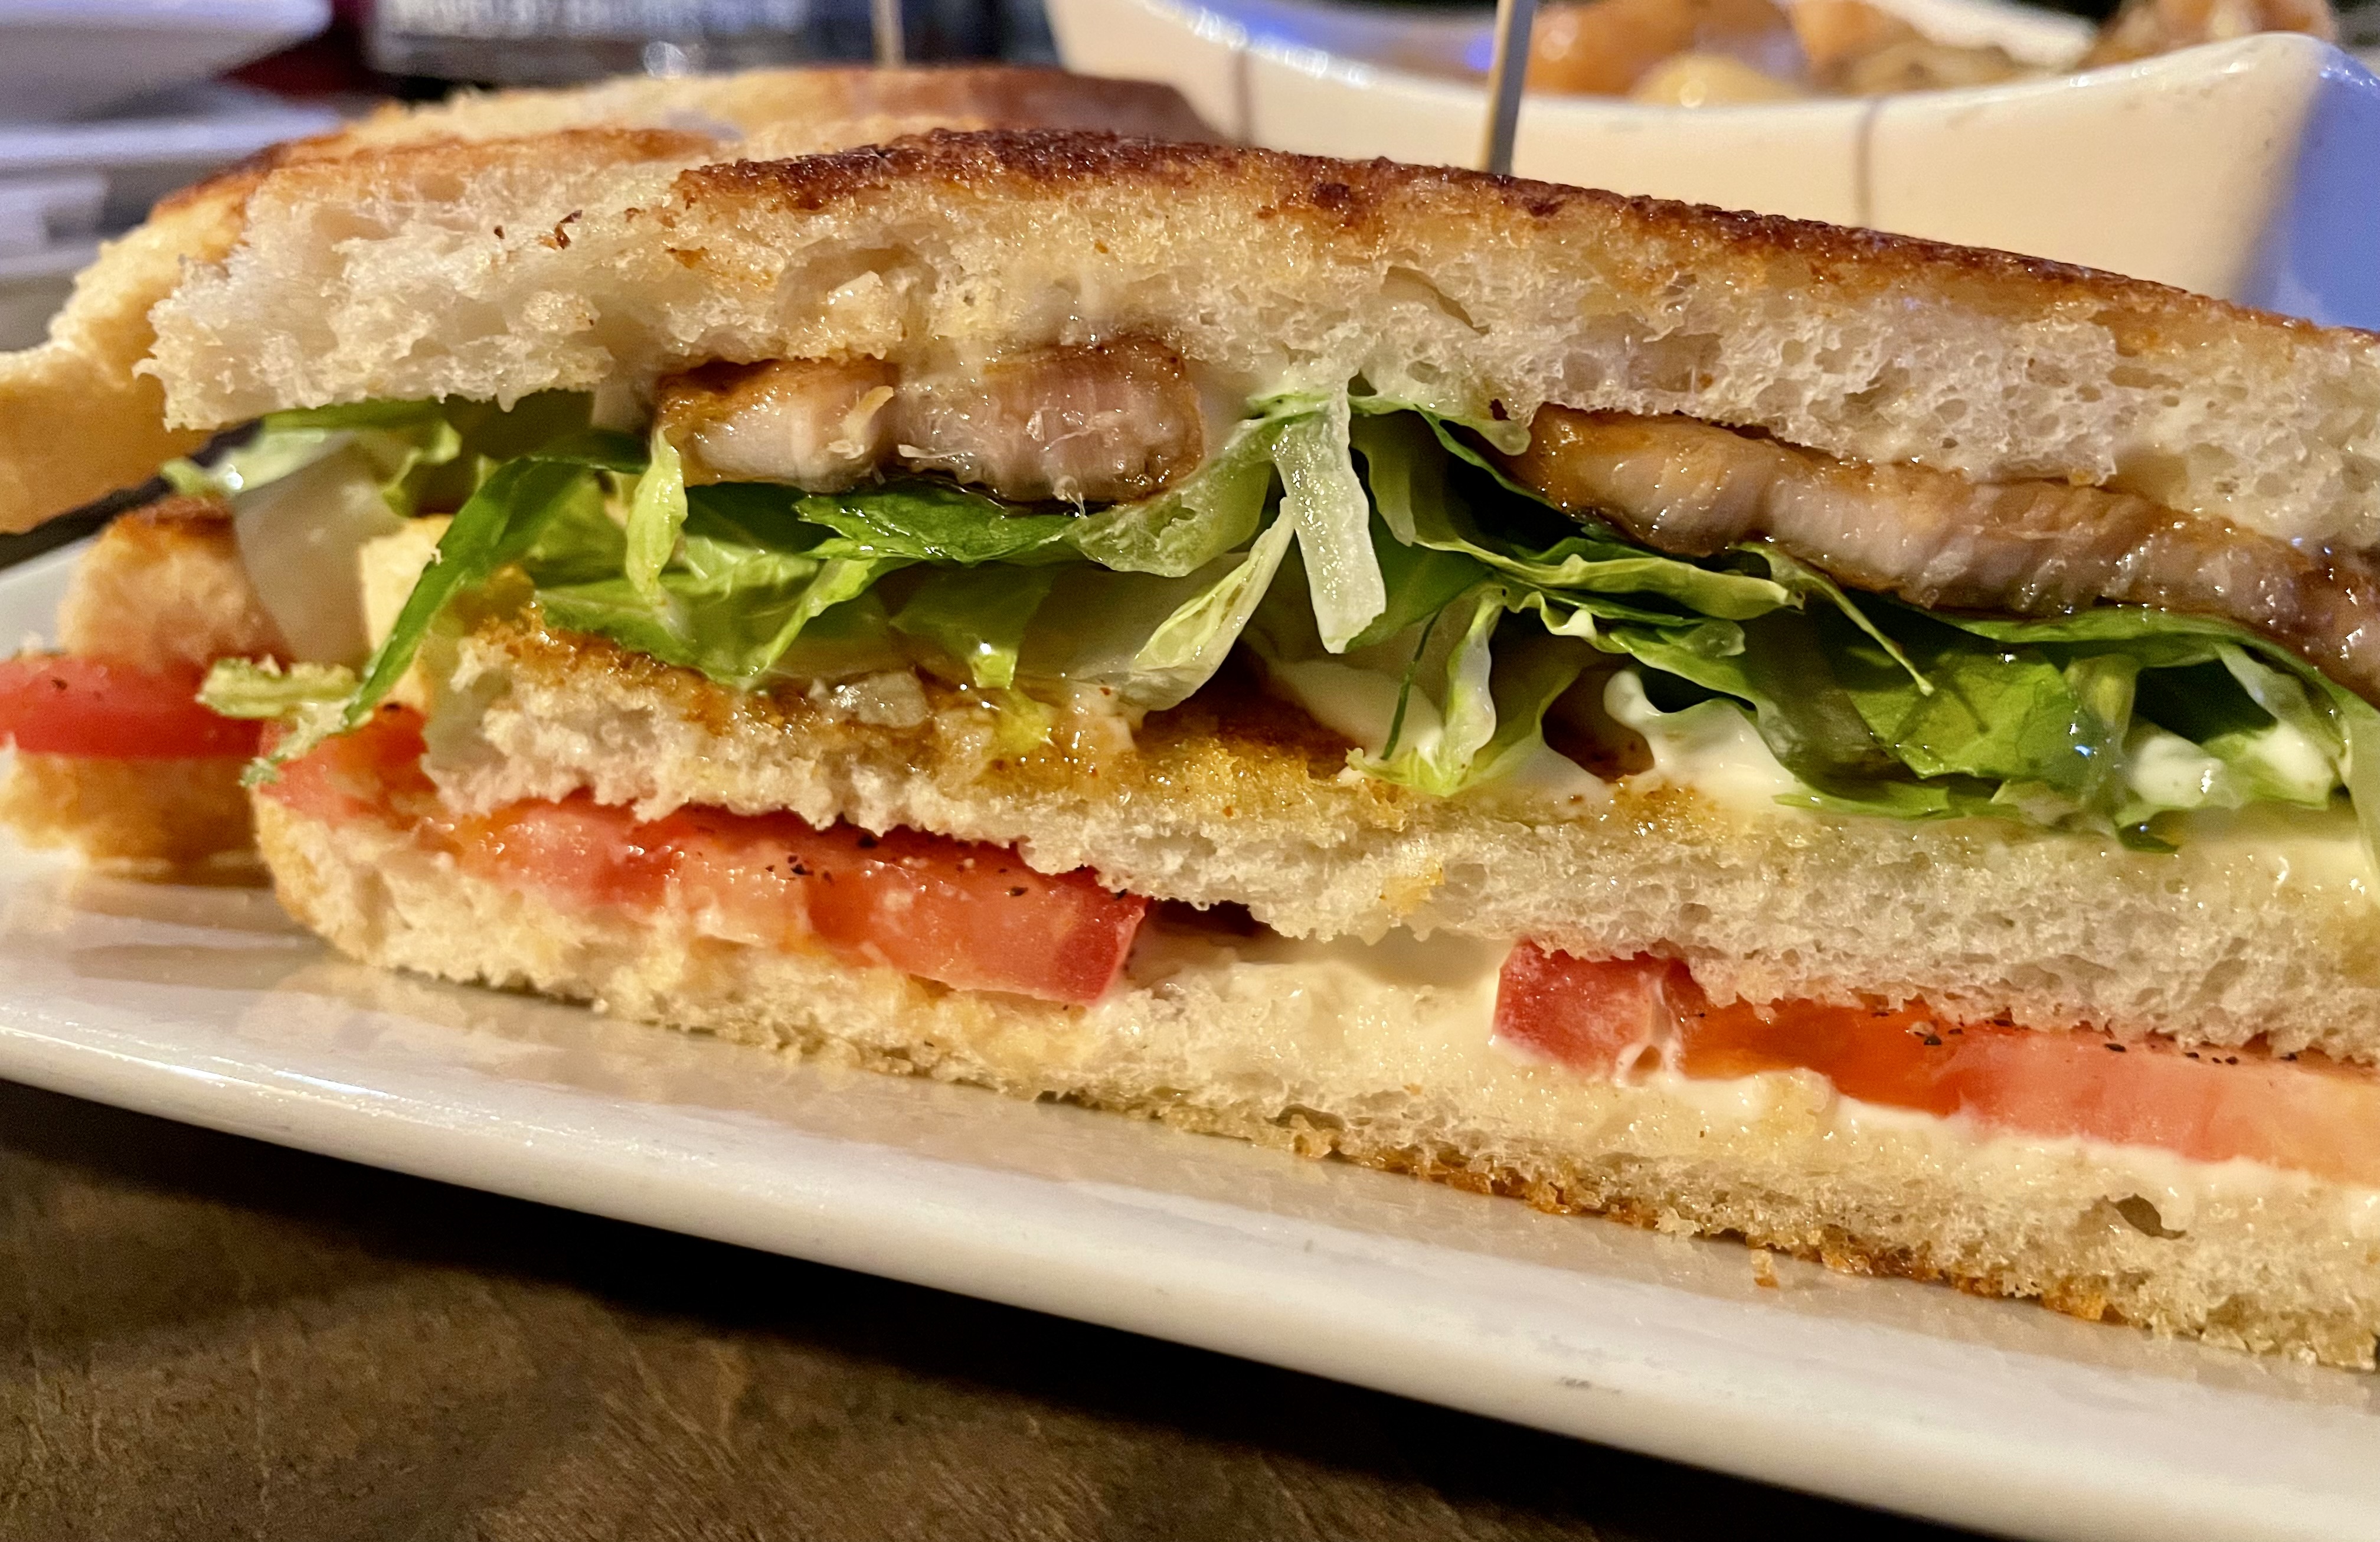 The porkbelly clubhouse sandwich comes with house roasted sliced chicken, crispy pork belly, lettuce, tomato, aioli on toasted and buttered bread from the Portuguese bakery